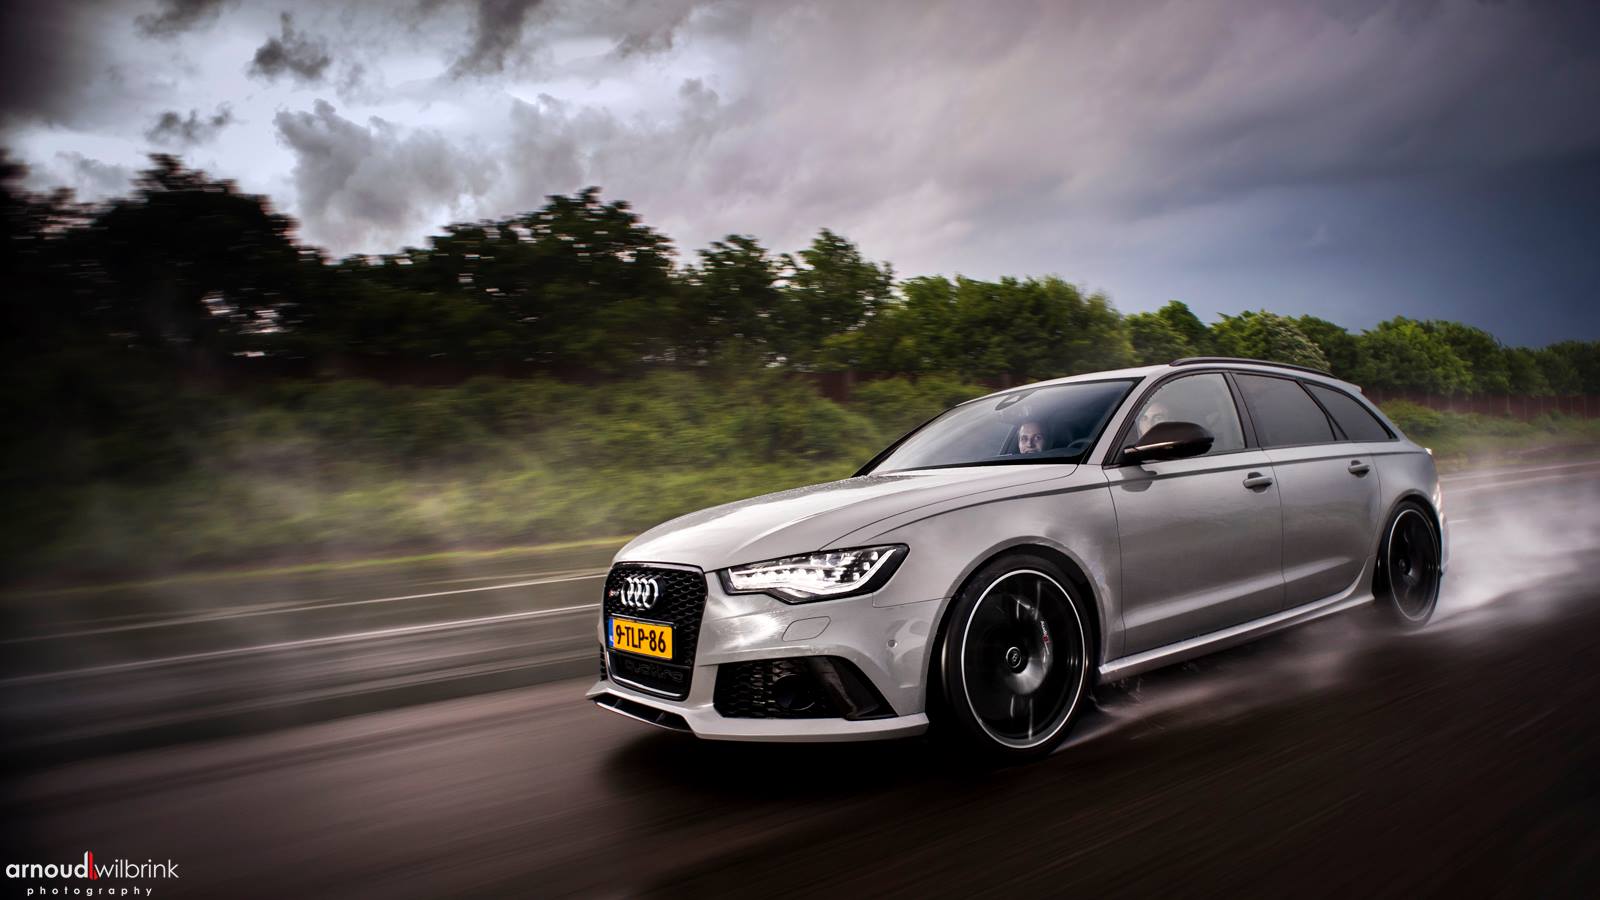 Awesome Hdq Audi Rs 6 Pictures - Audi Rs6 Nardo Grey - HD Wallpaper 